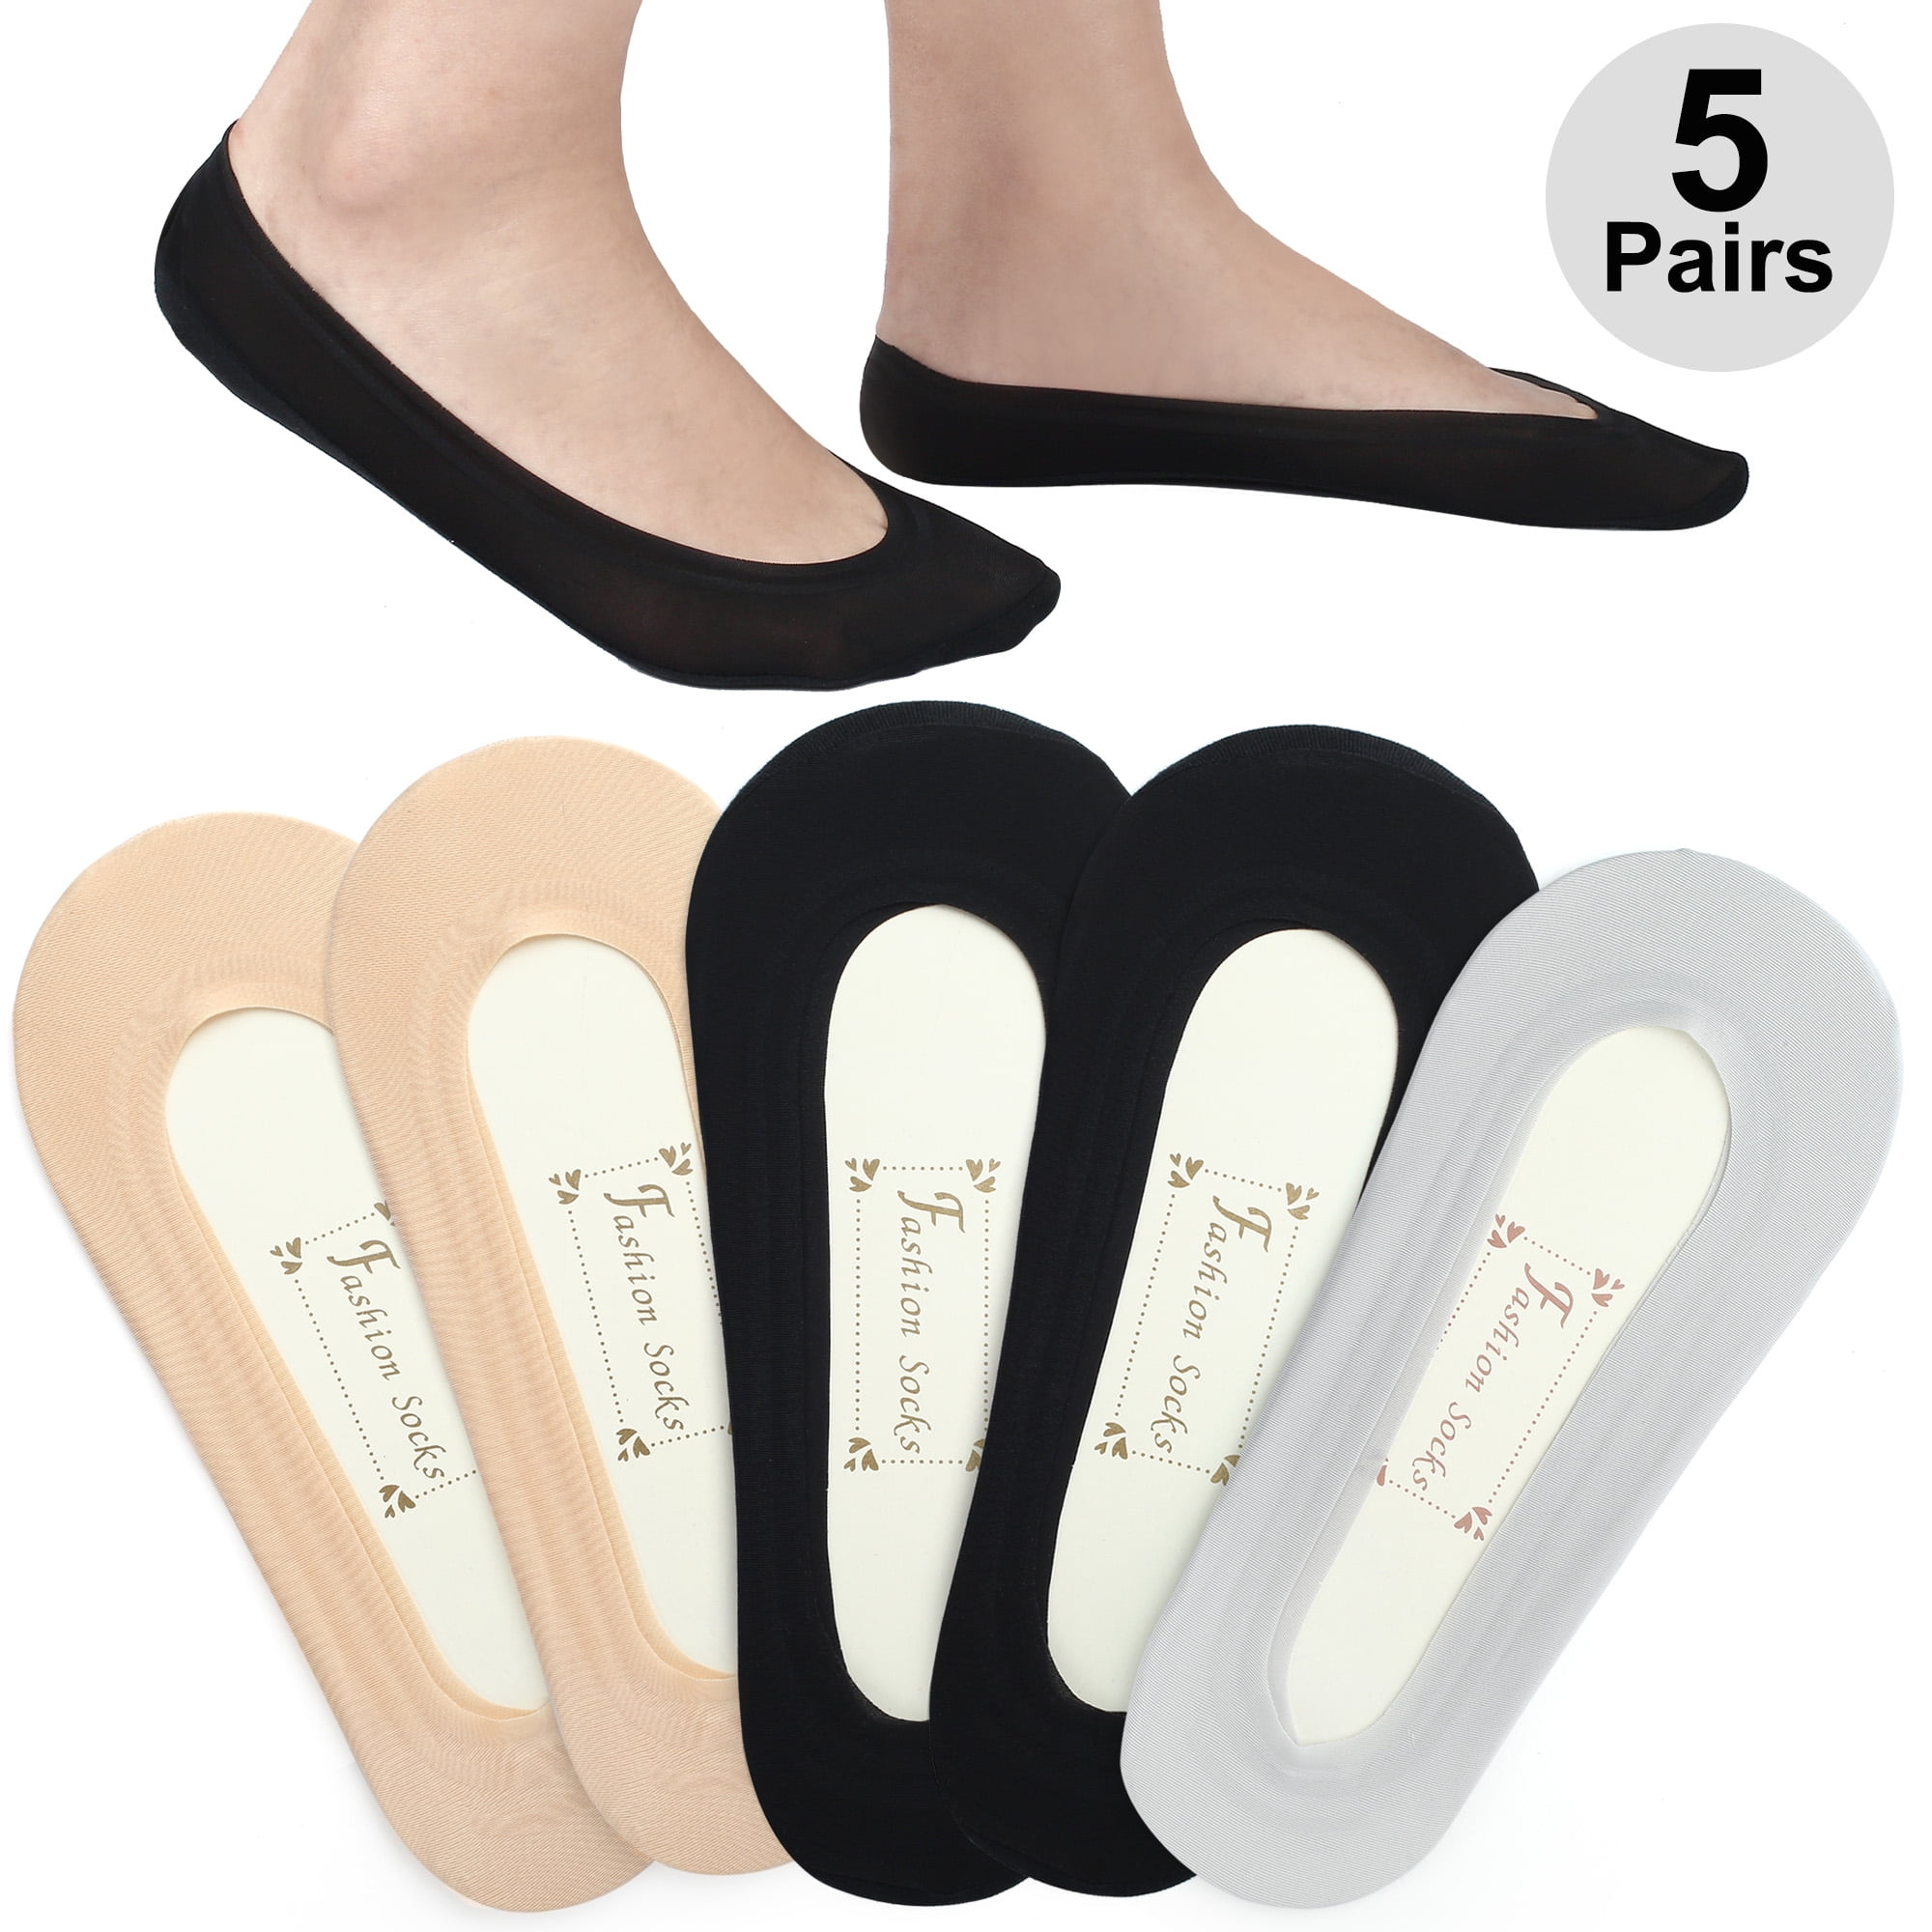 Litthing No Show Socks for Women Ultra Low Cut Socks Cotton Invisible Flat Socks